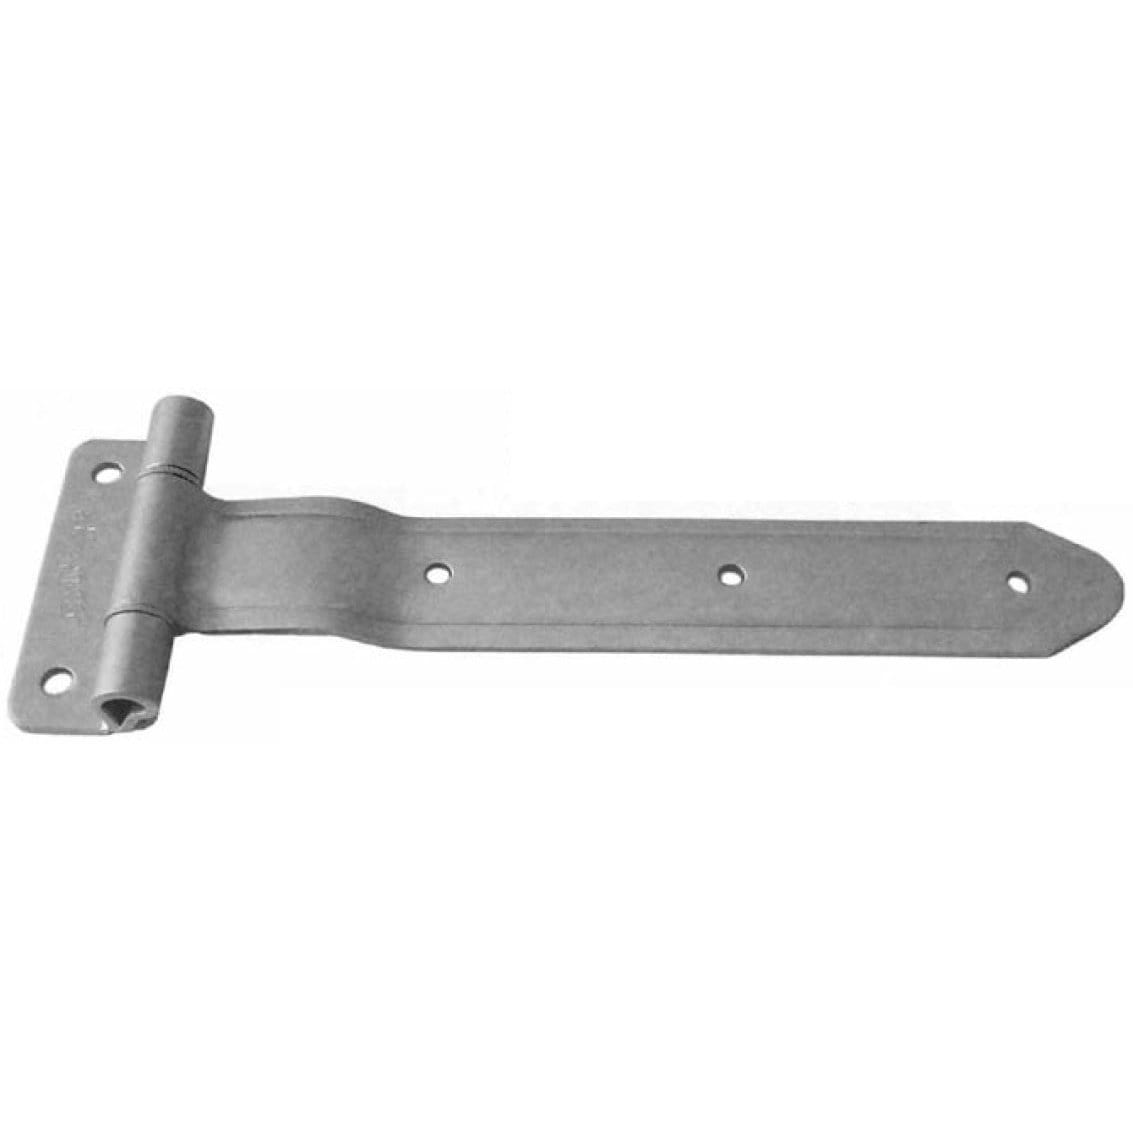 Truck / Trailer Hinges - Embossed Steel - Narrow Bracket Over The Seal Economy Hinges - Multiple Sizes - Zinc Plated - Sold Individually